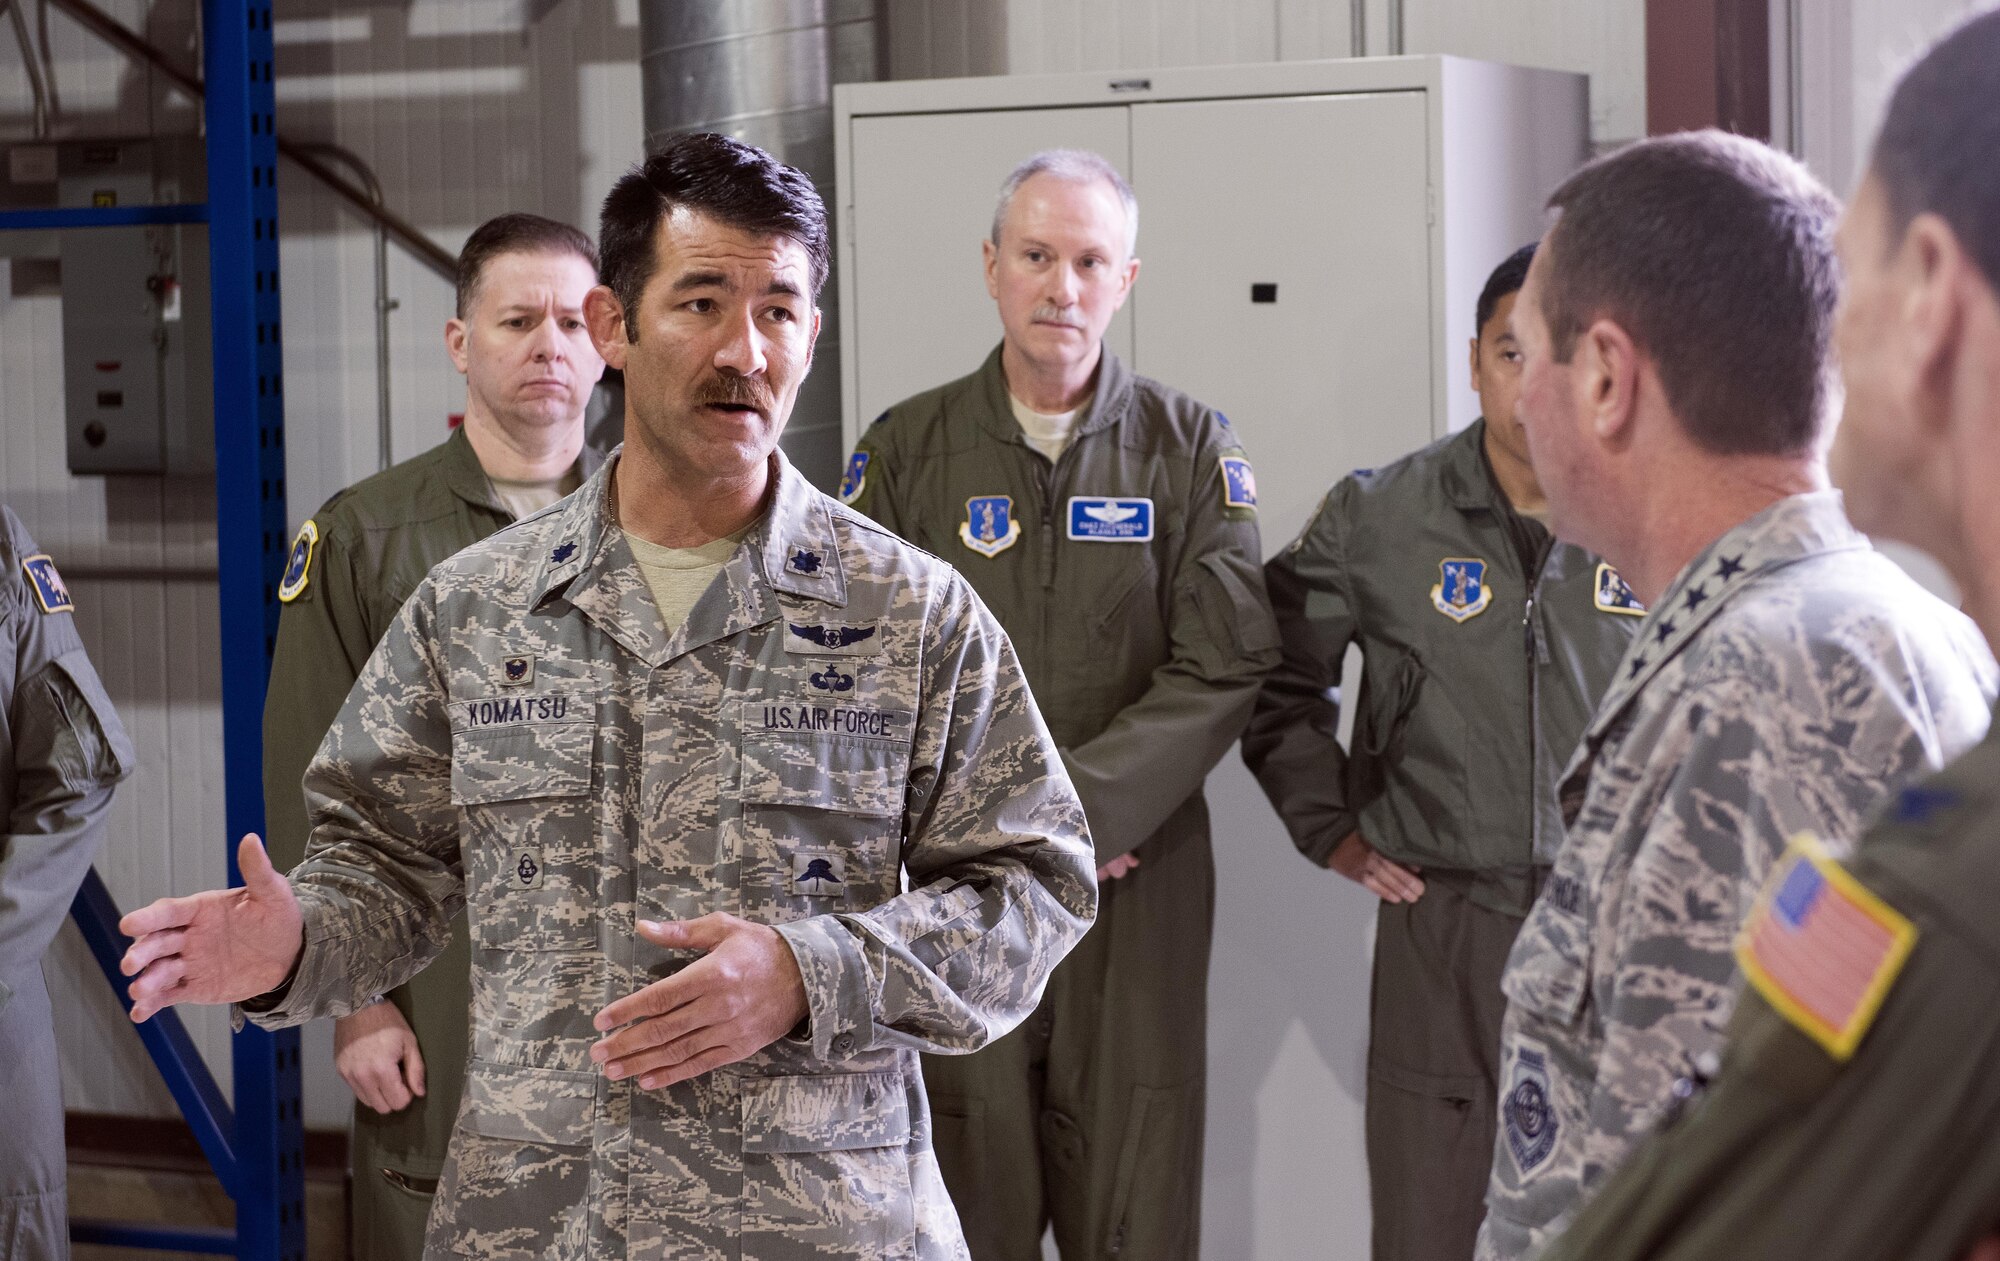 Gen. Joseph L. Lengyel (right), chief of National Guard Bureau, is briefed on the Alaska Air National Guard's innovative long-range rescue capabilities by Col. Matthew Komatsu, commander of the 176th Wing's 212th Rescue Squadron, here May 7, 2017. Lengyel visited the wing as part of a wider tour of Alaska National Guard installations. While here, he met with the wing's senior leaders, toured maintenance facilities, and met and fielded questions from Airmen of all ranks.